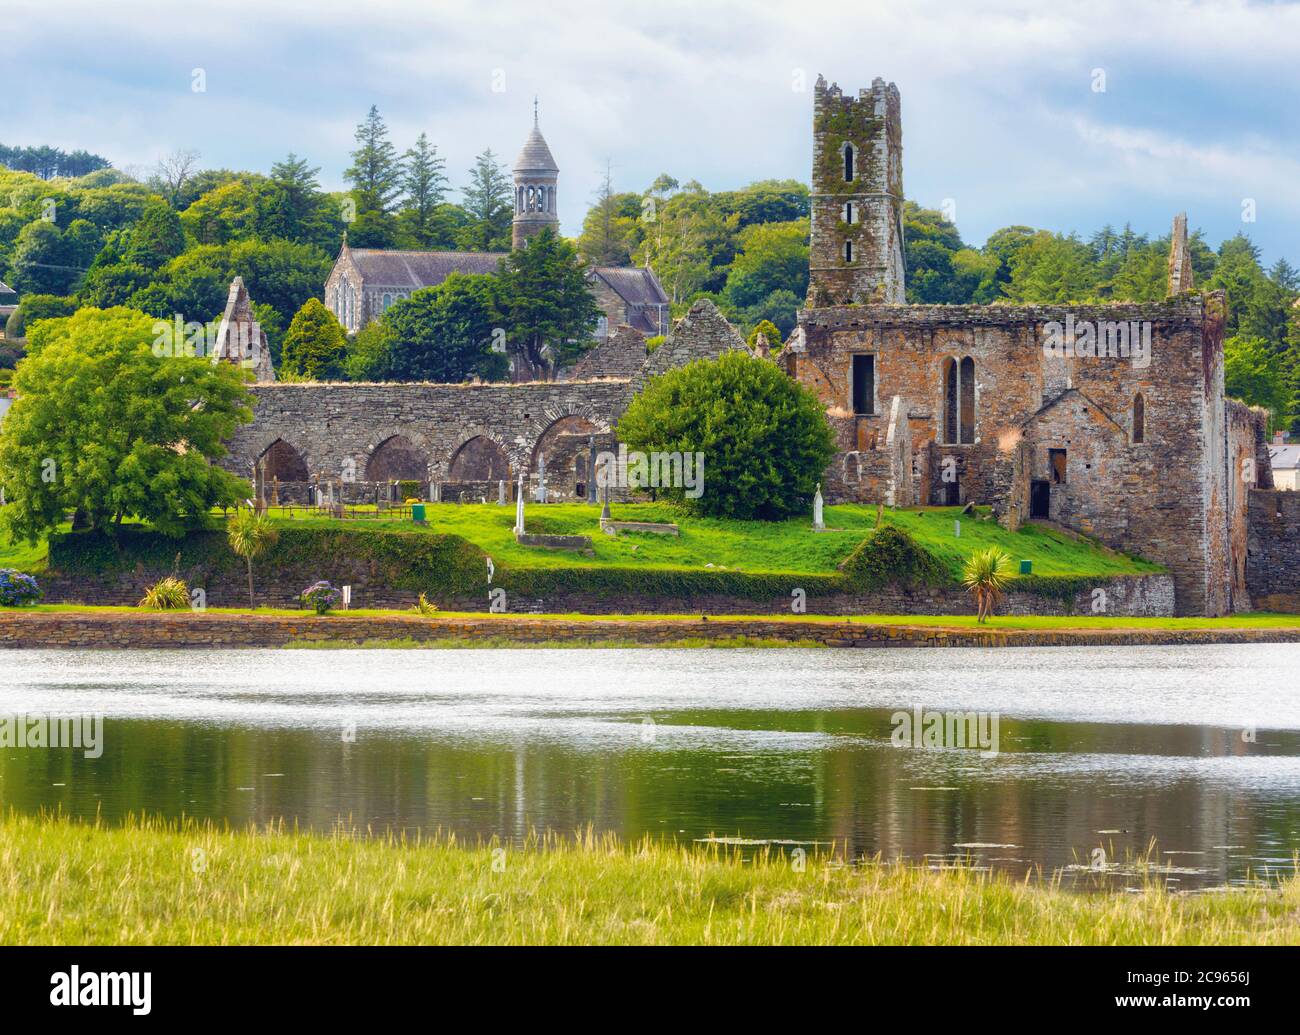 Timoleaque, West Cork, County Cork, Republic of Ireland. Eire.  Timoleaque Abbey founded by the Franciscan order in 1240 A.D.  Church of the Nativity Stock Photo